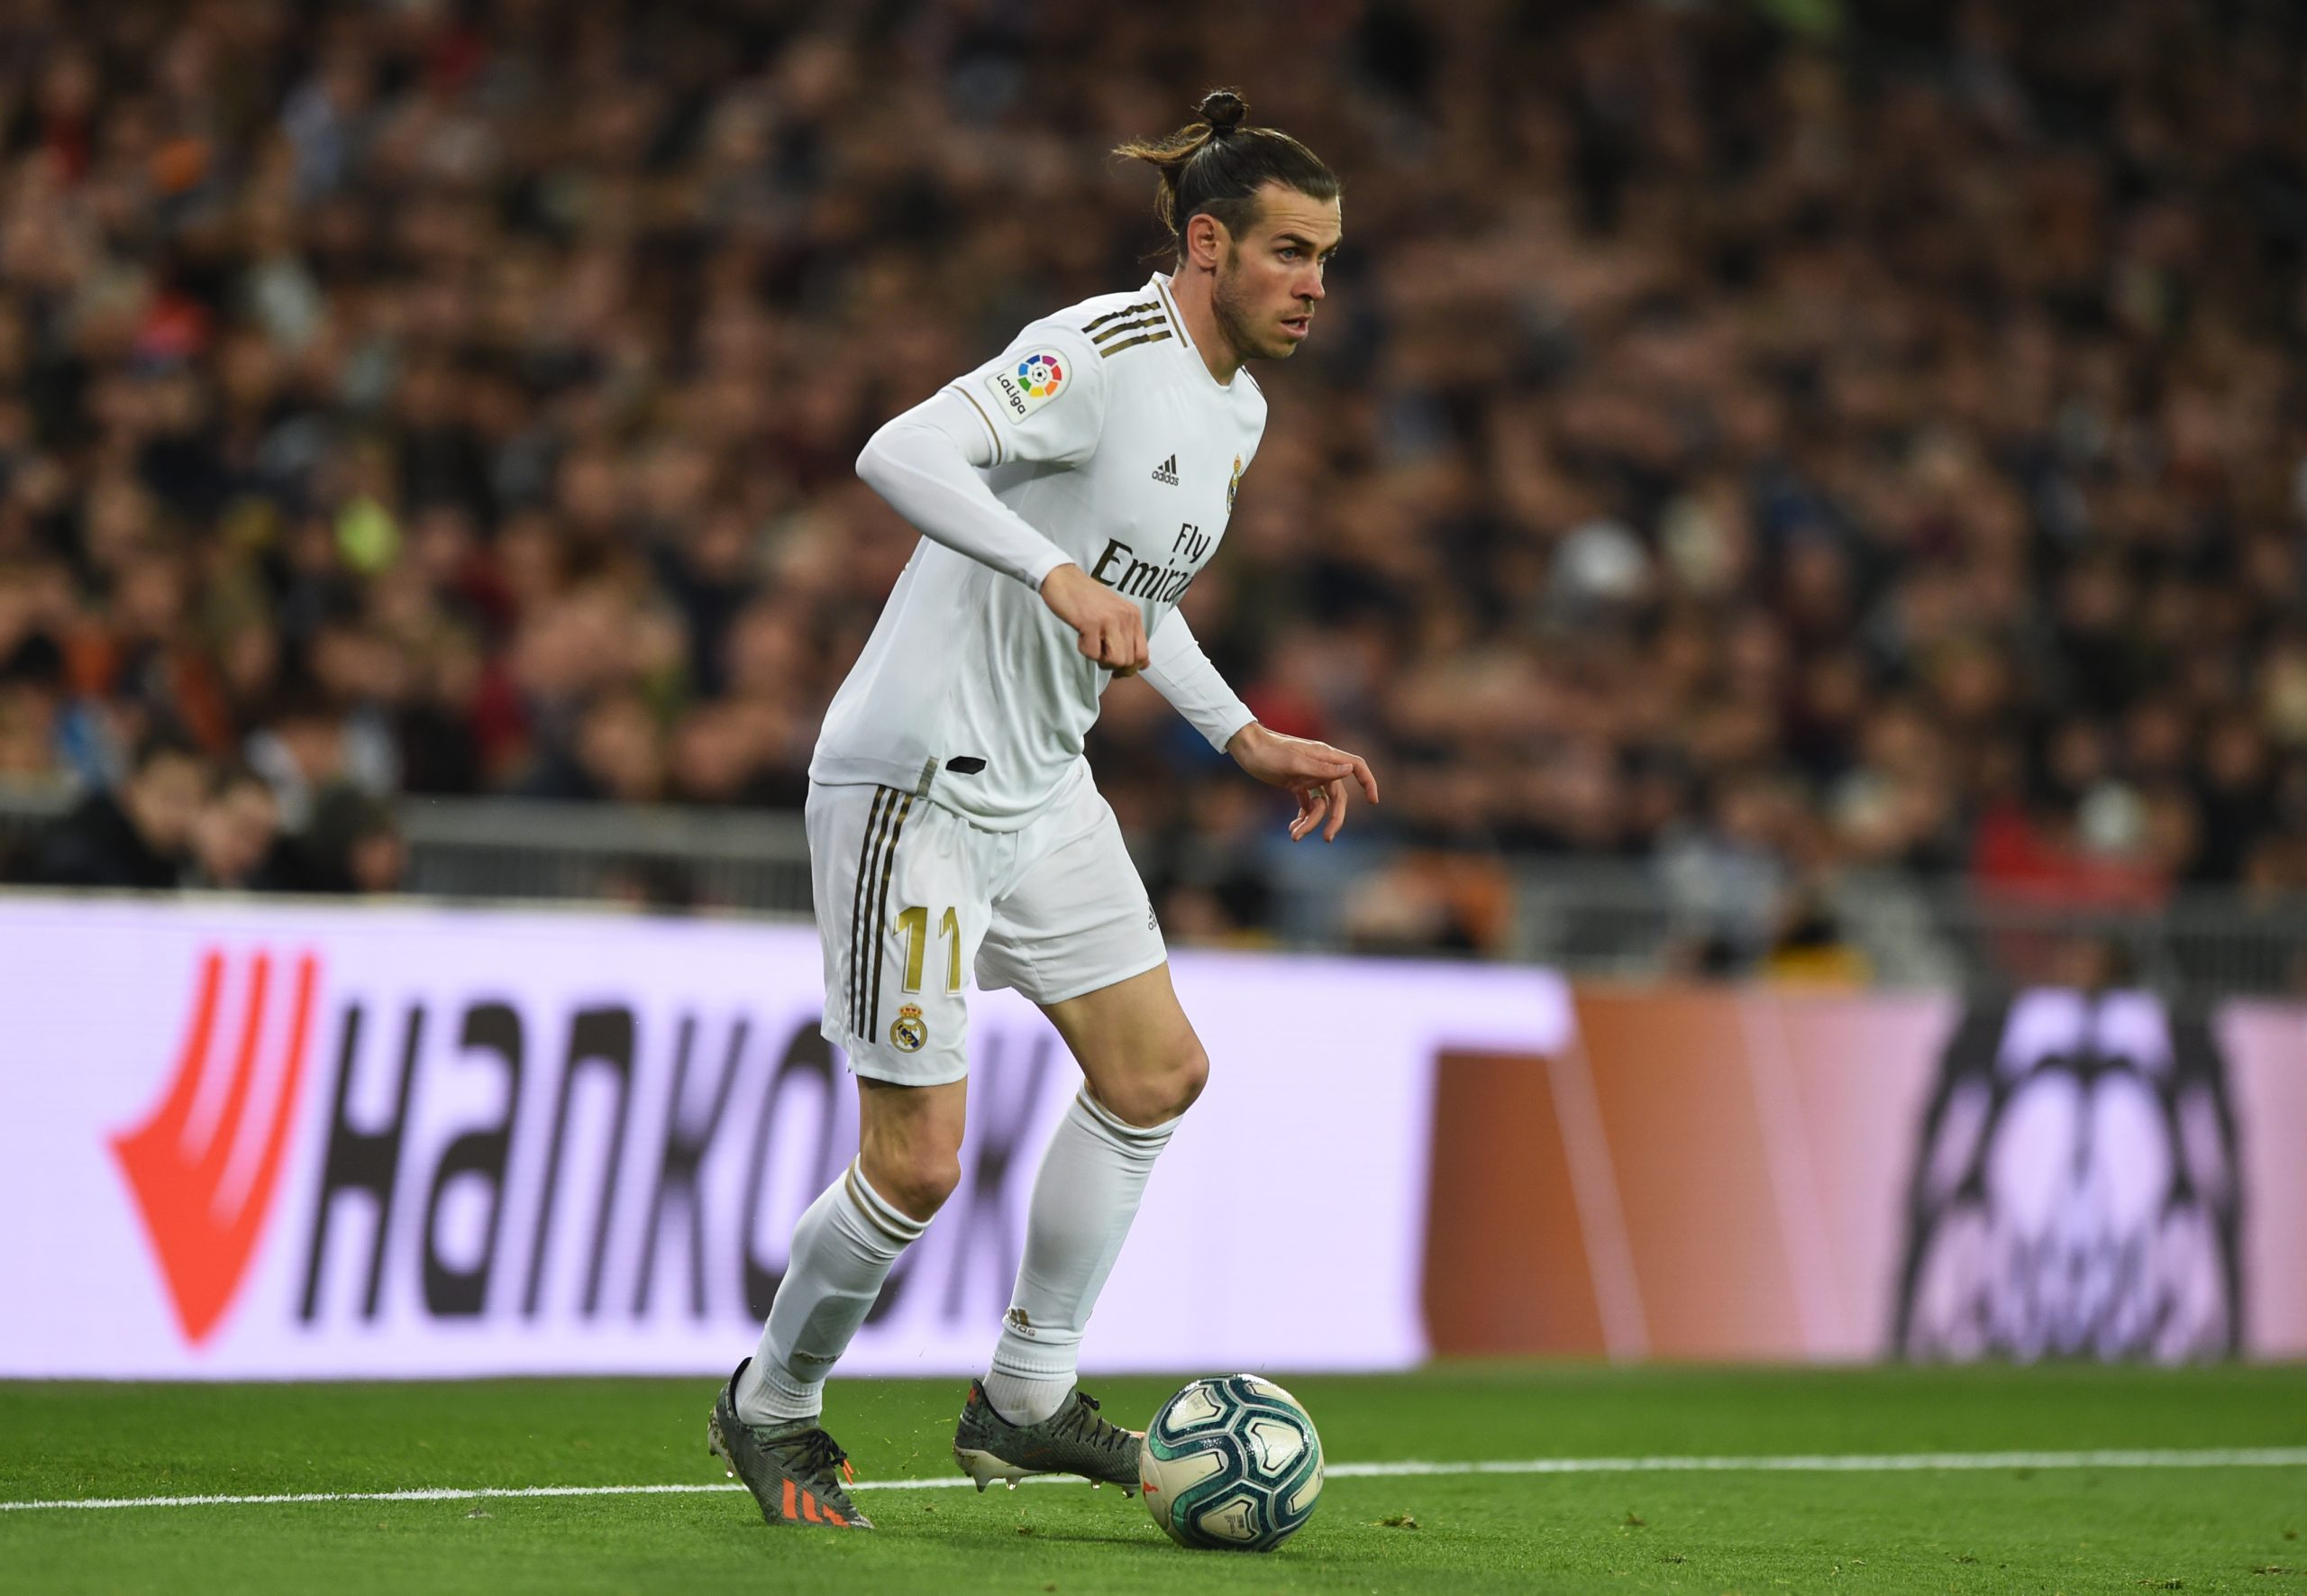 Gareth Bale Urged To Make Newcastle United Switch - Bale in action during a match